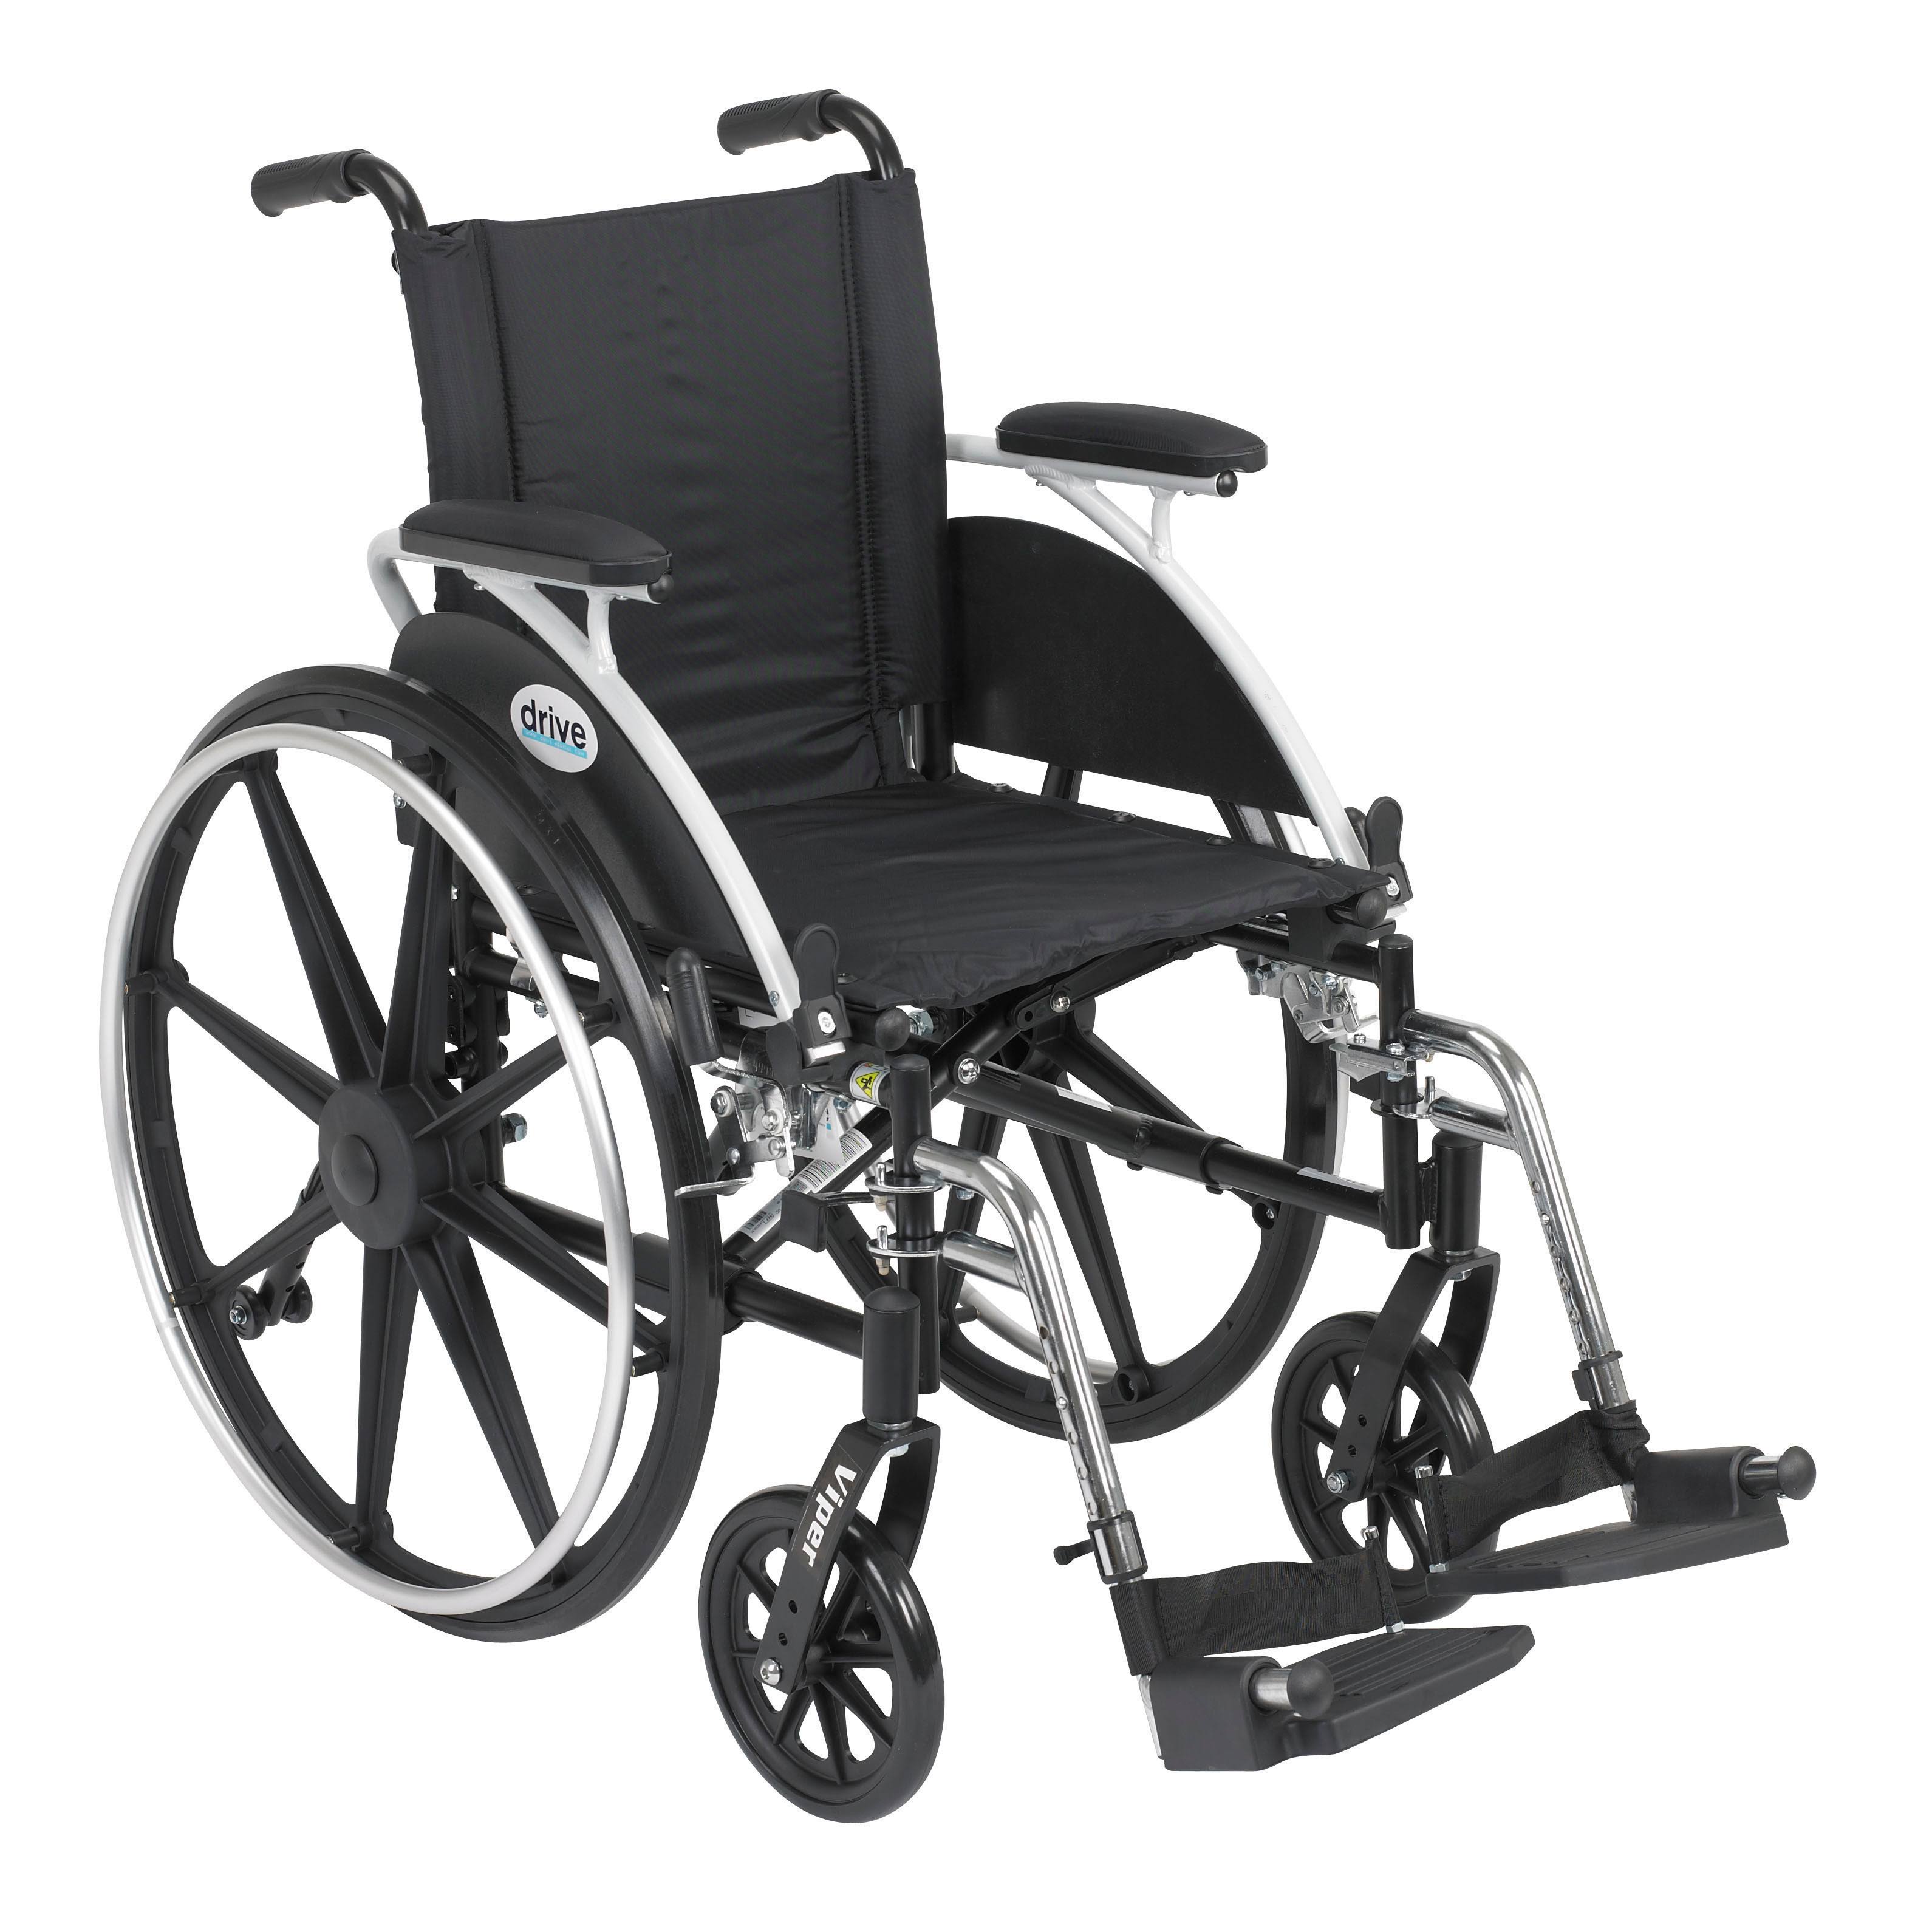 Drive Medical Viper Wheelchair with Various Flip Back Desk Arm Styles and Front Rigging Options, Black, 14"